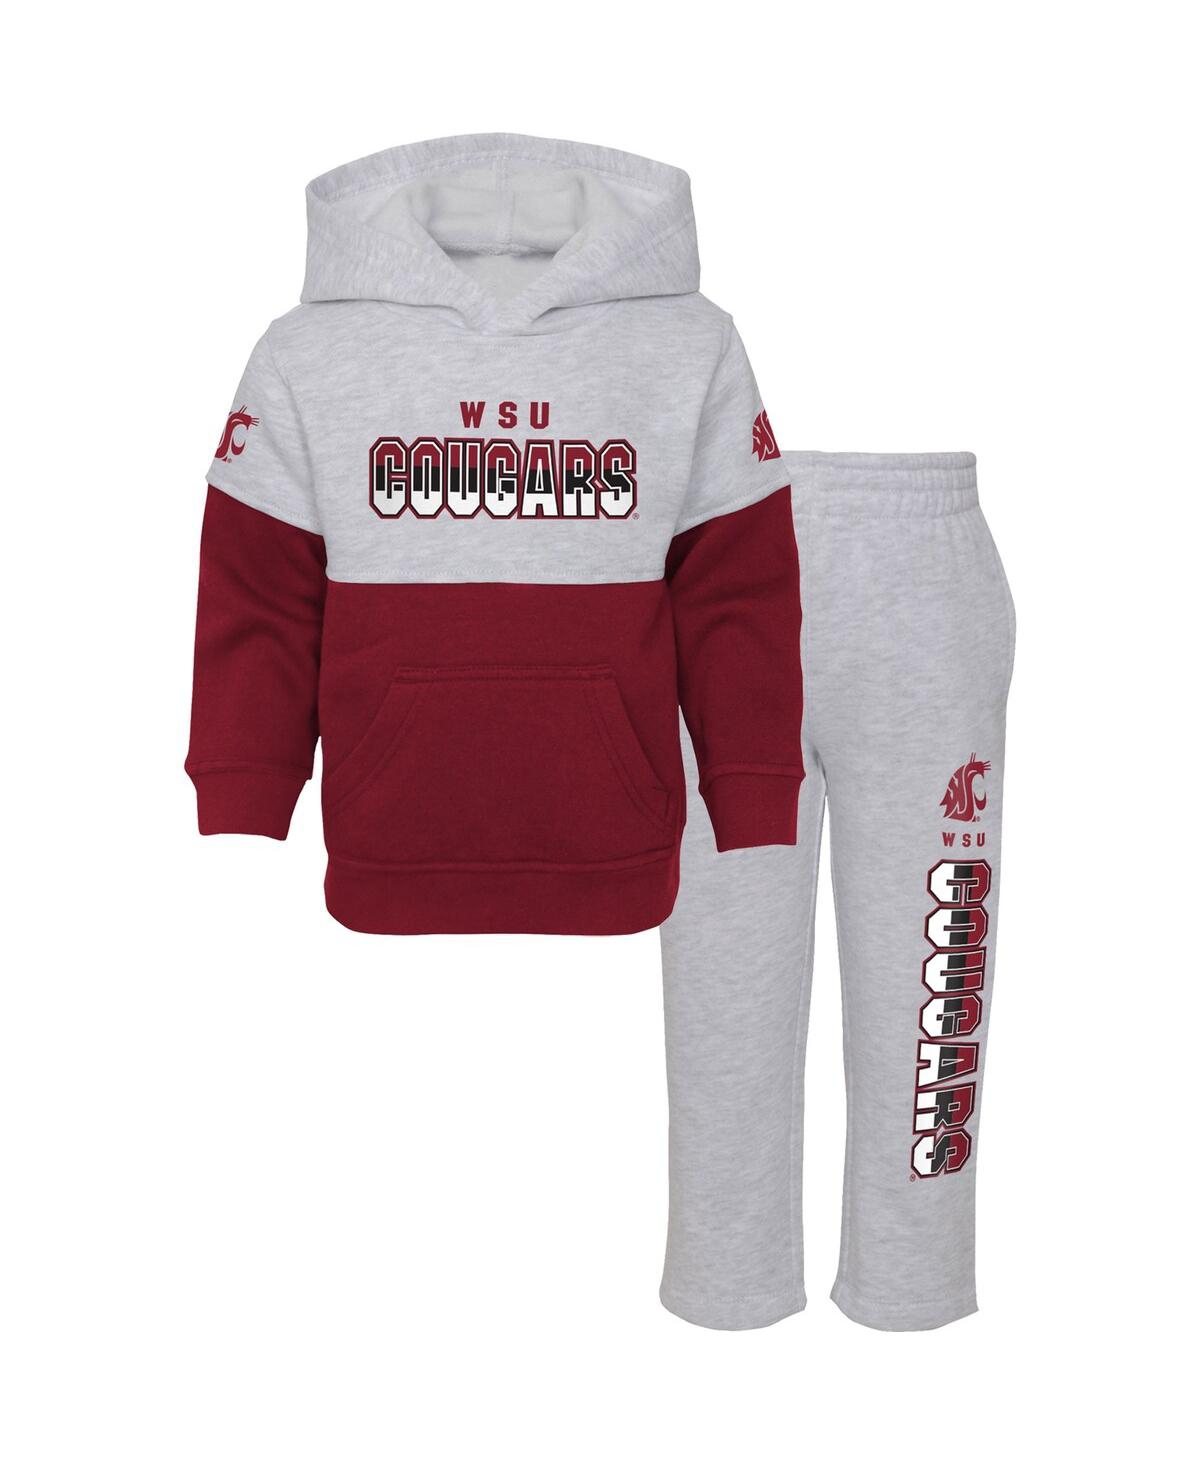 Outerstuff Babies' Toddler Boys And Girls Heather Gray, Crimson Washington State Cougars Playmaker Pullover Hoodie And In Heather Gray,crimson